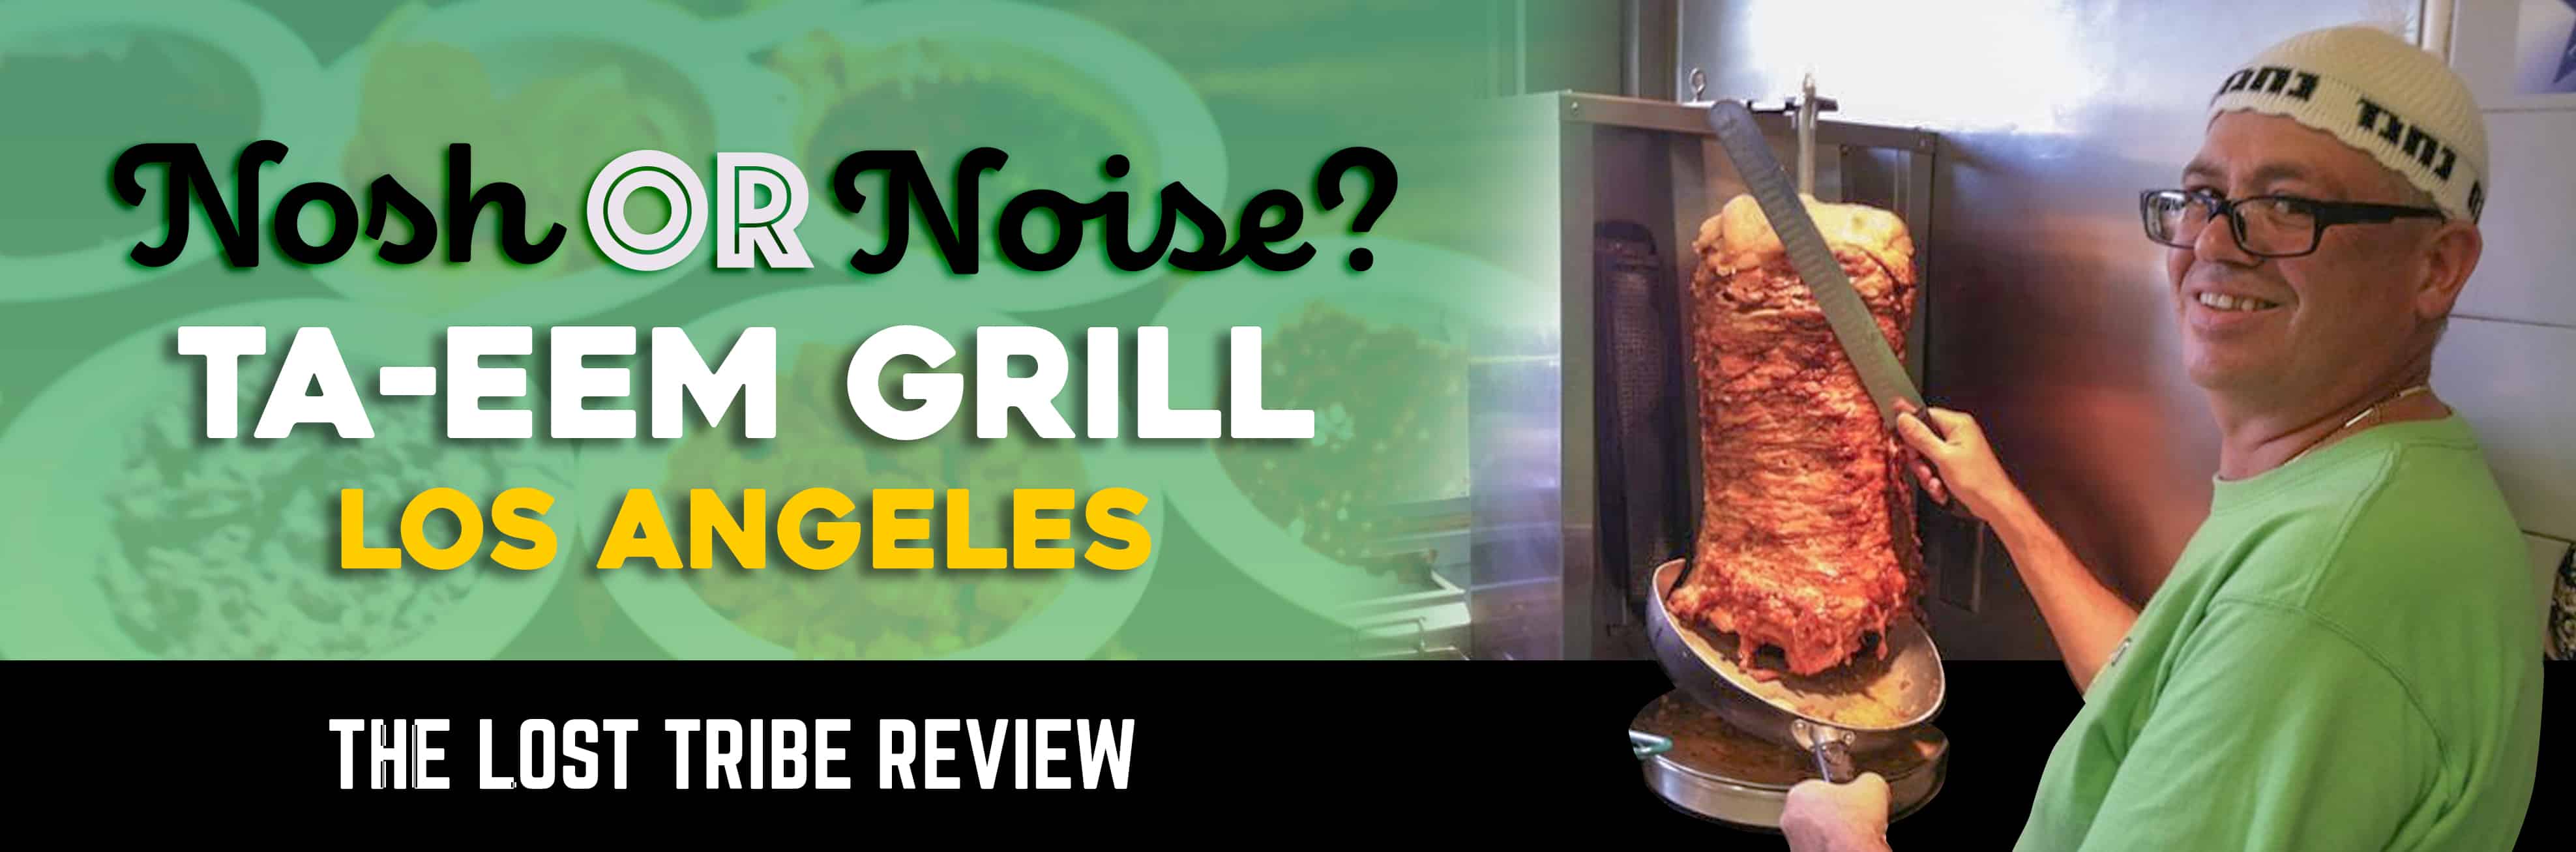 Nosh Or Noise? Ta-Eem Grill — The Lost Tribe Review